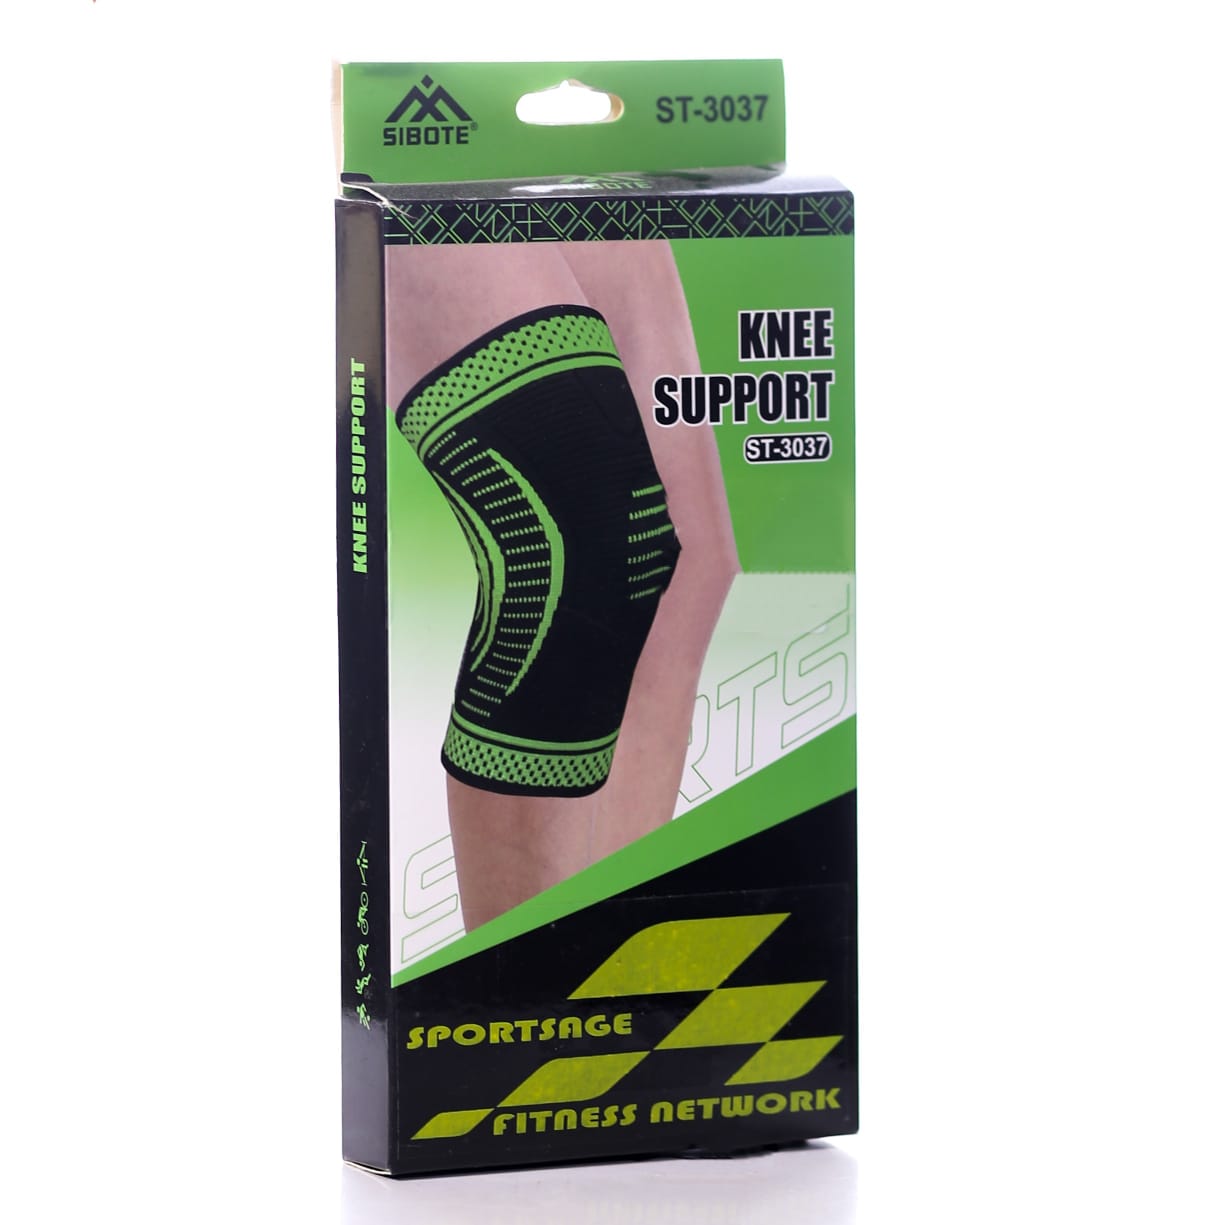 Knee Support St-3037